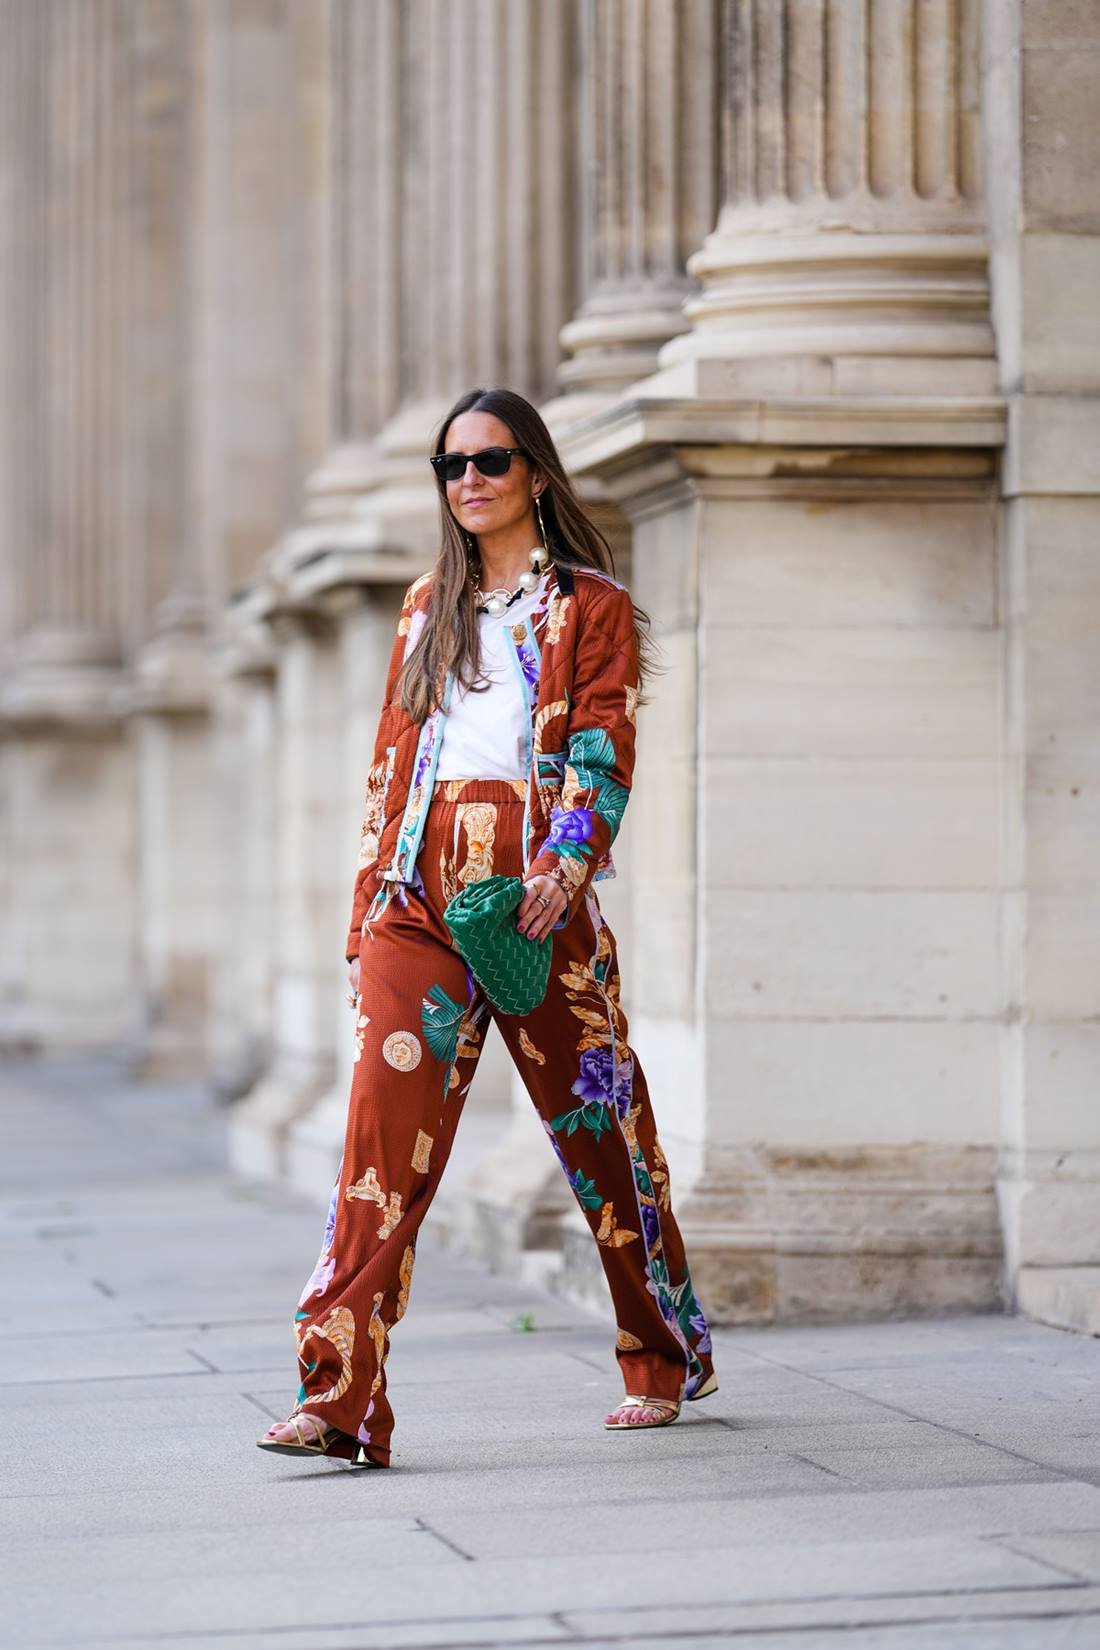 Middle aged Caucasian woman with long straight brown hair walking in the streets of Paris, France.  She wears a white t-shirt, a brown coat and pants set with colorful prints, a green leather bag, The Pouch model, from the Bottega Veneta brand, and Rayban sunglasses.  - Metropolises